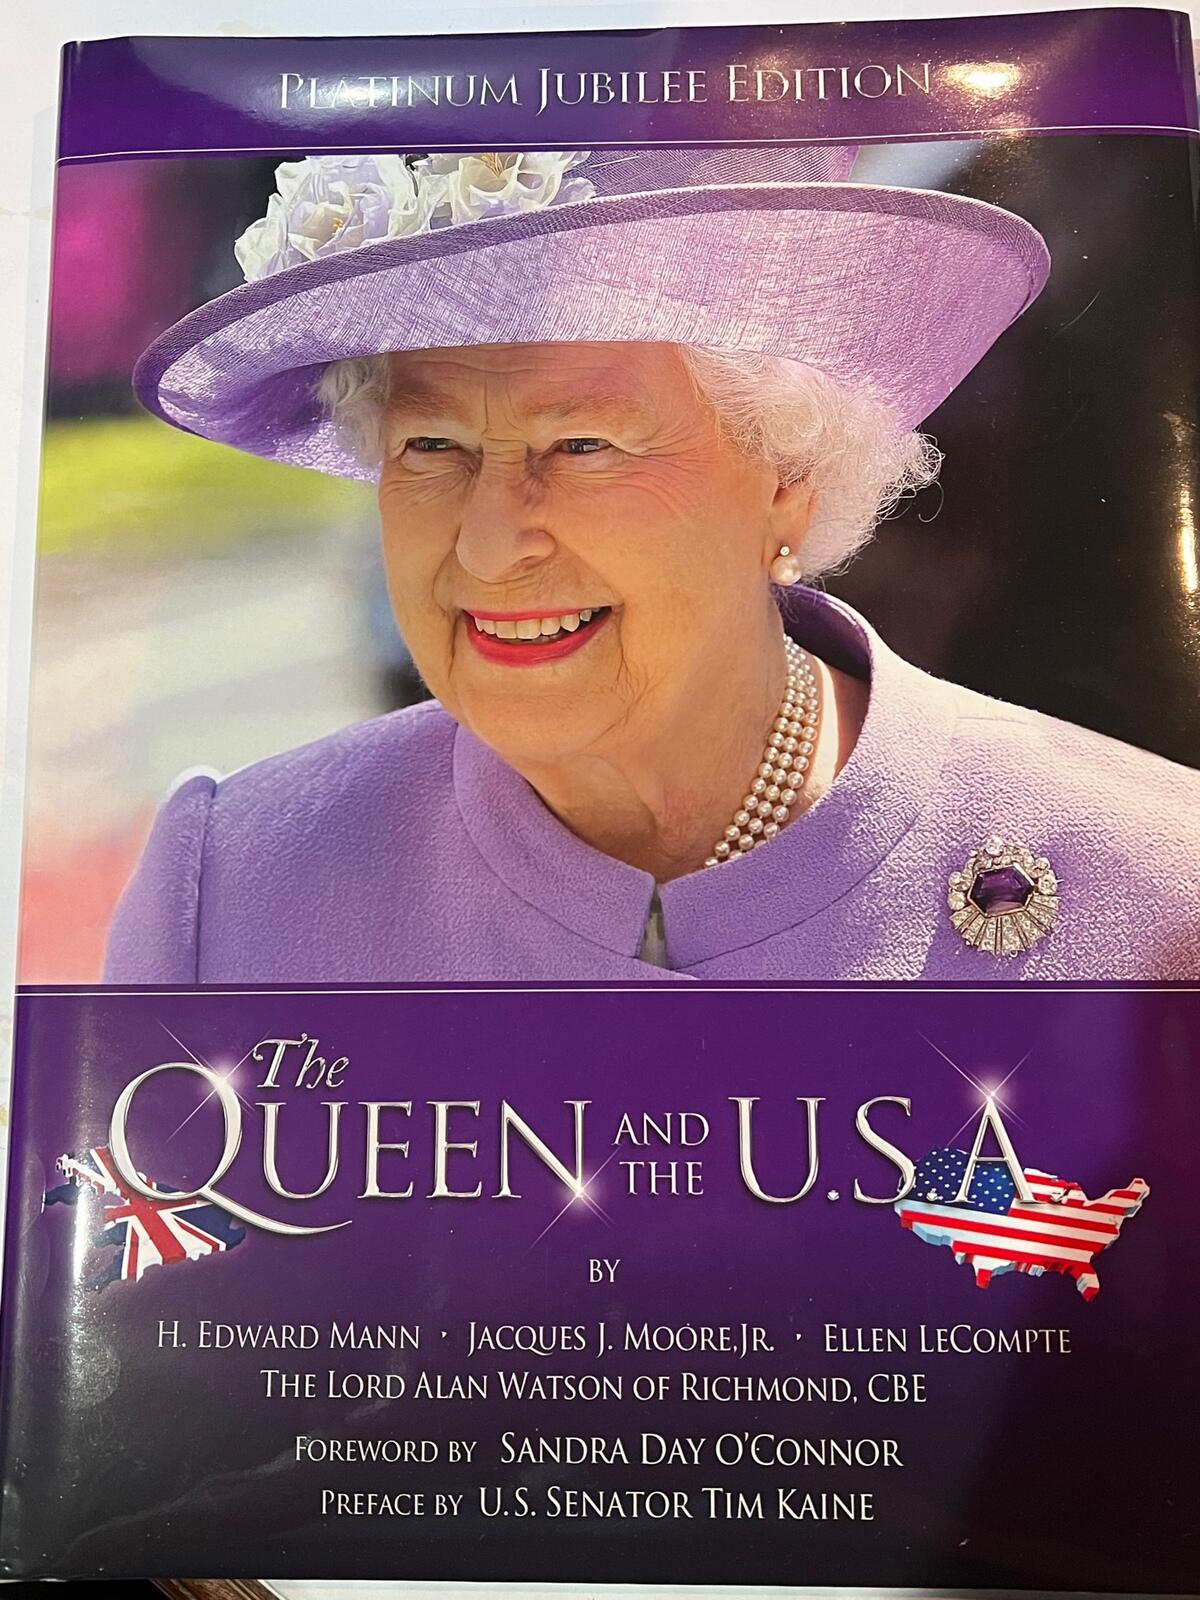 The book cover of \"The Queen and the USA\" by Jacques Moore